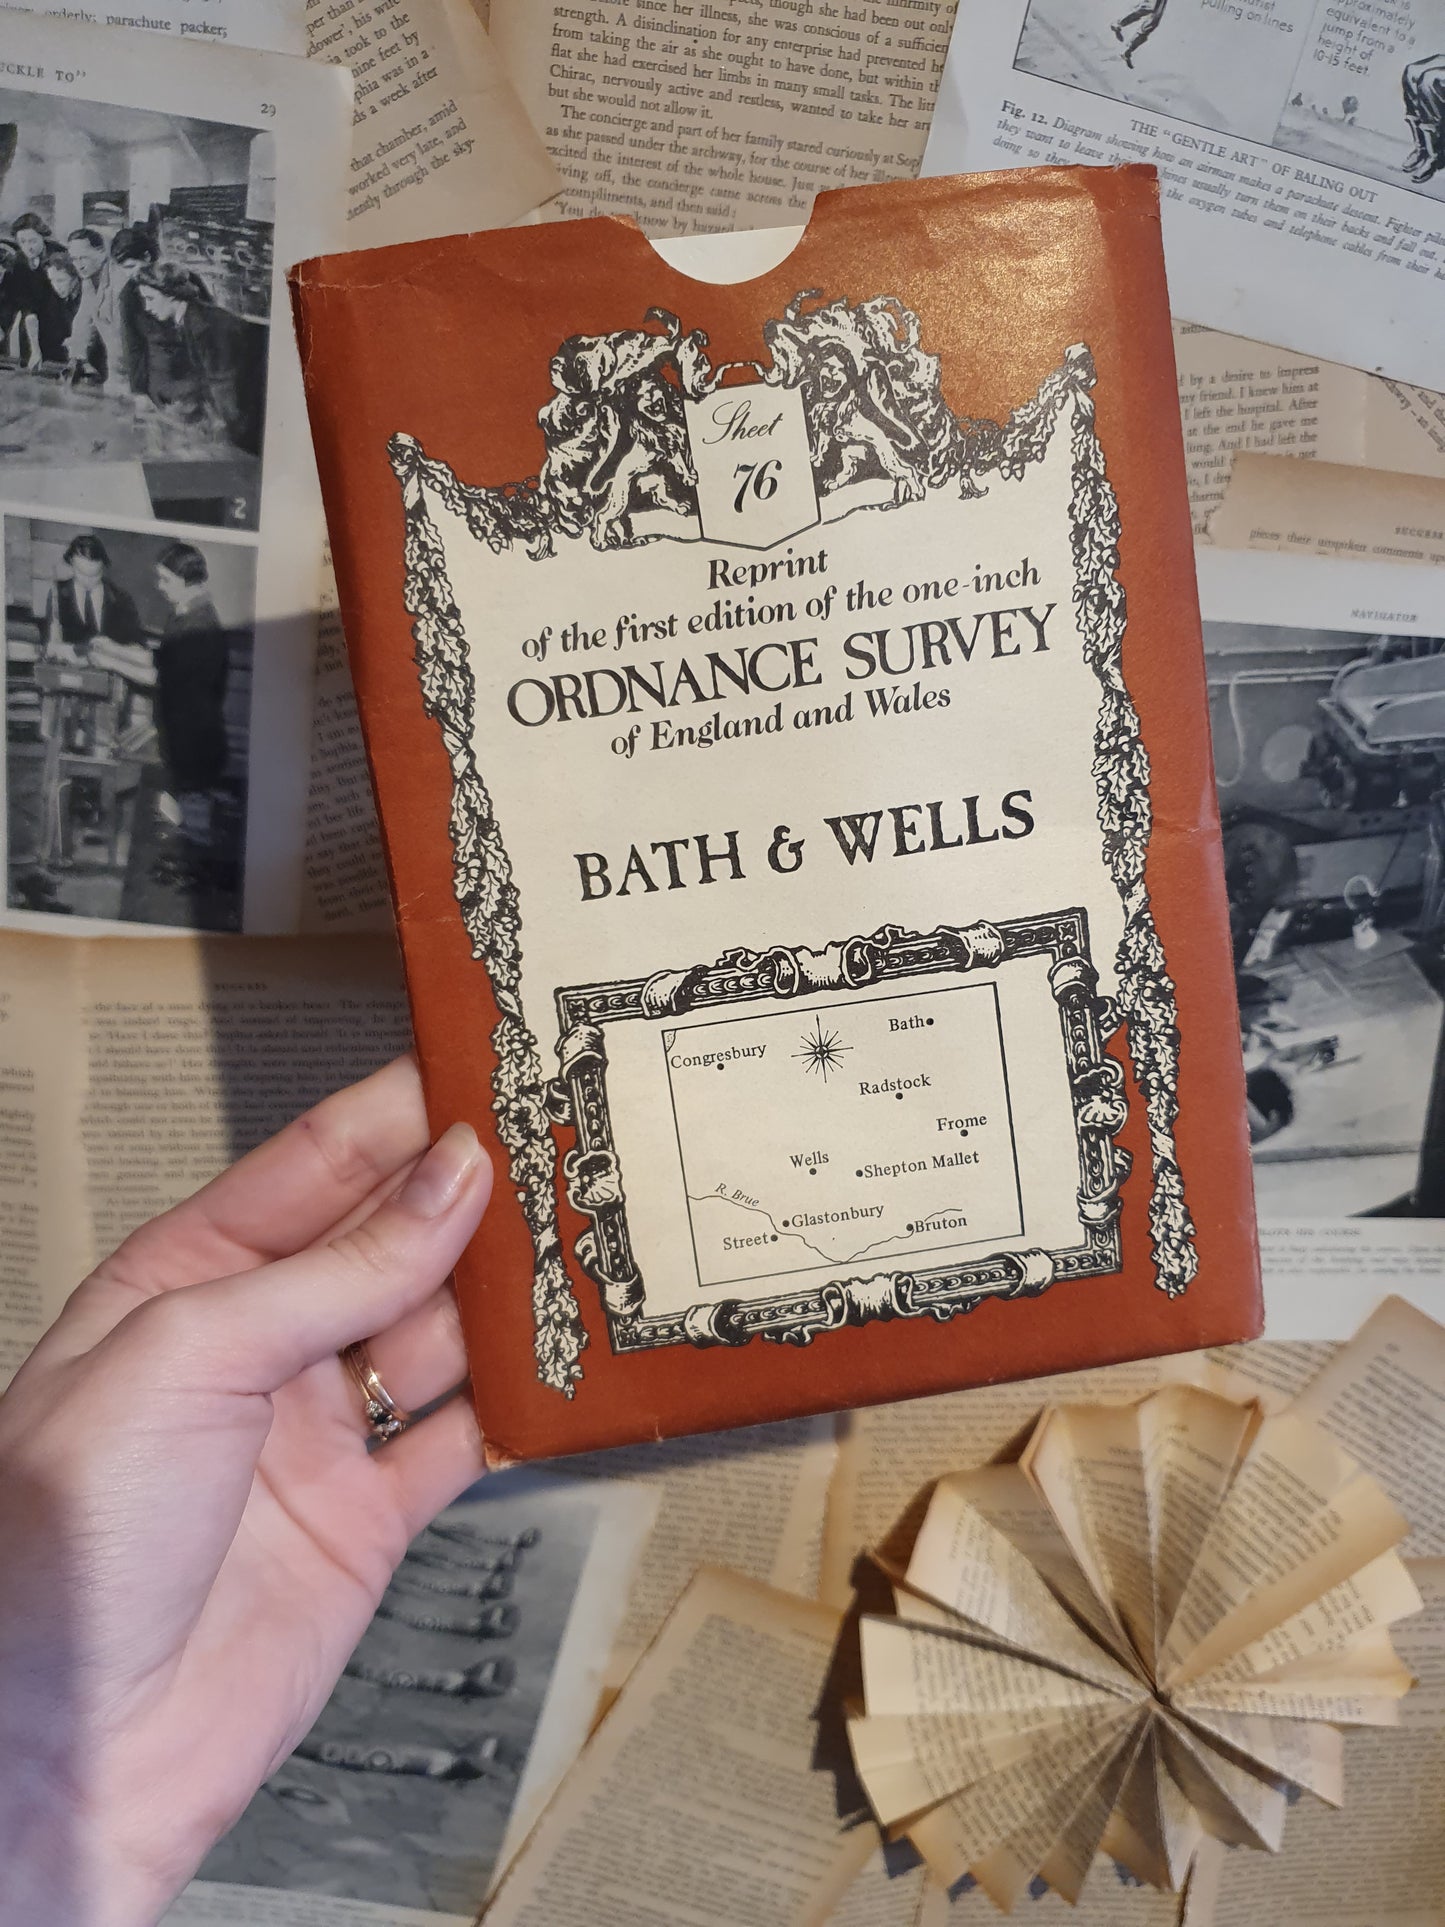 Reprint of the First Edition of the One-Inch Ordnance Survey of England and Wales - Bath & Wells (Sheet 76)